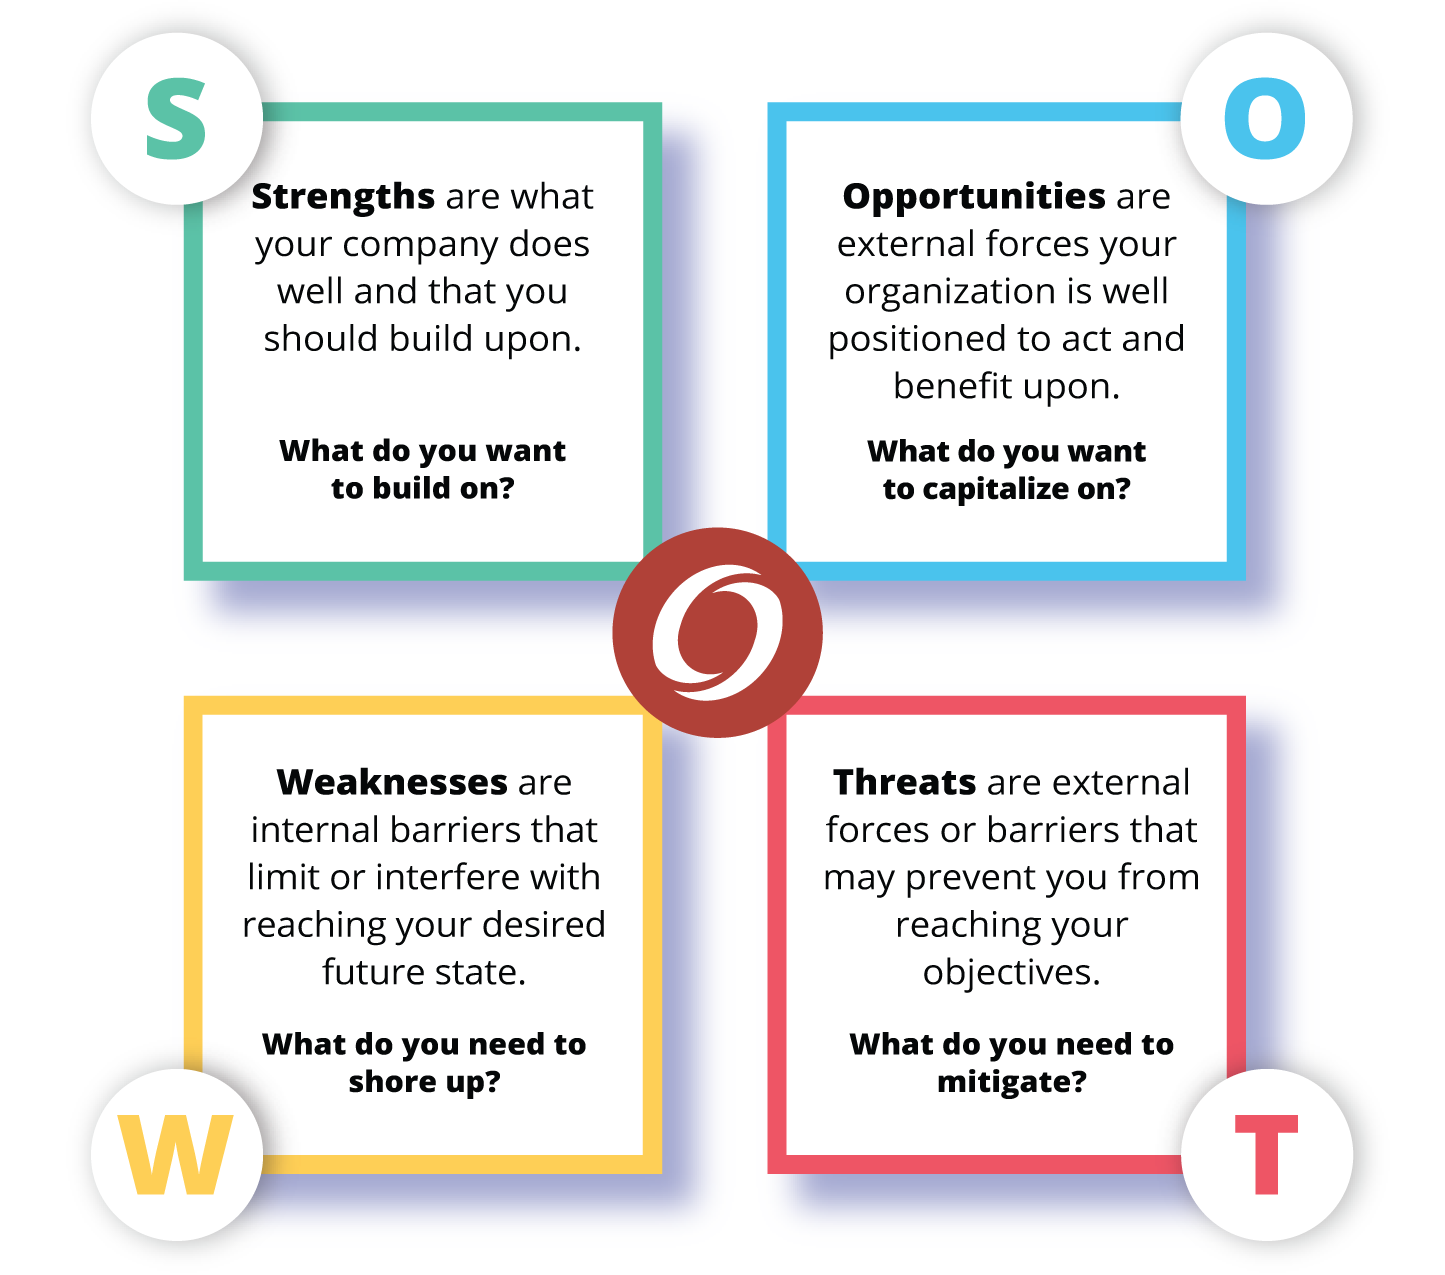 SWOT Analysis - Strengths weaknesses opportunities and threats